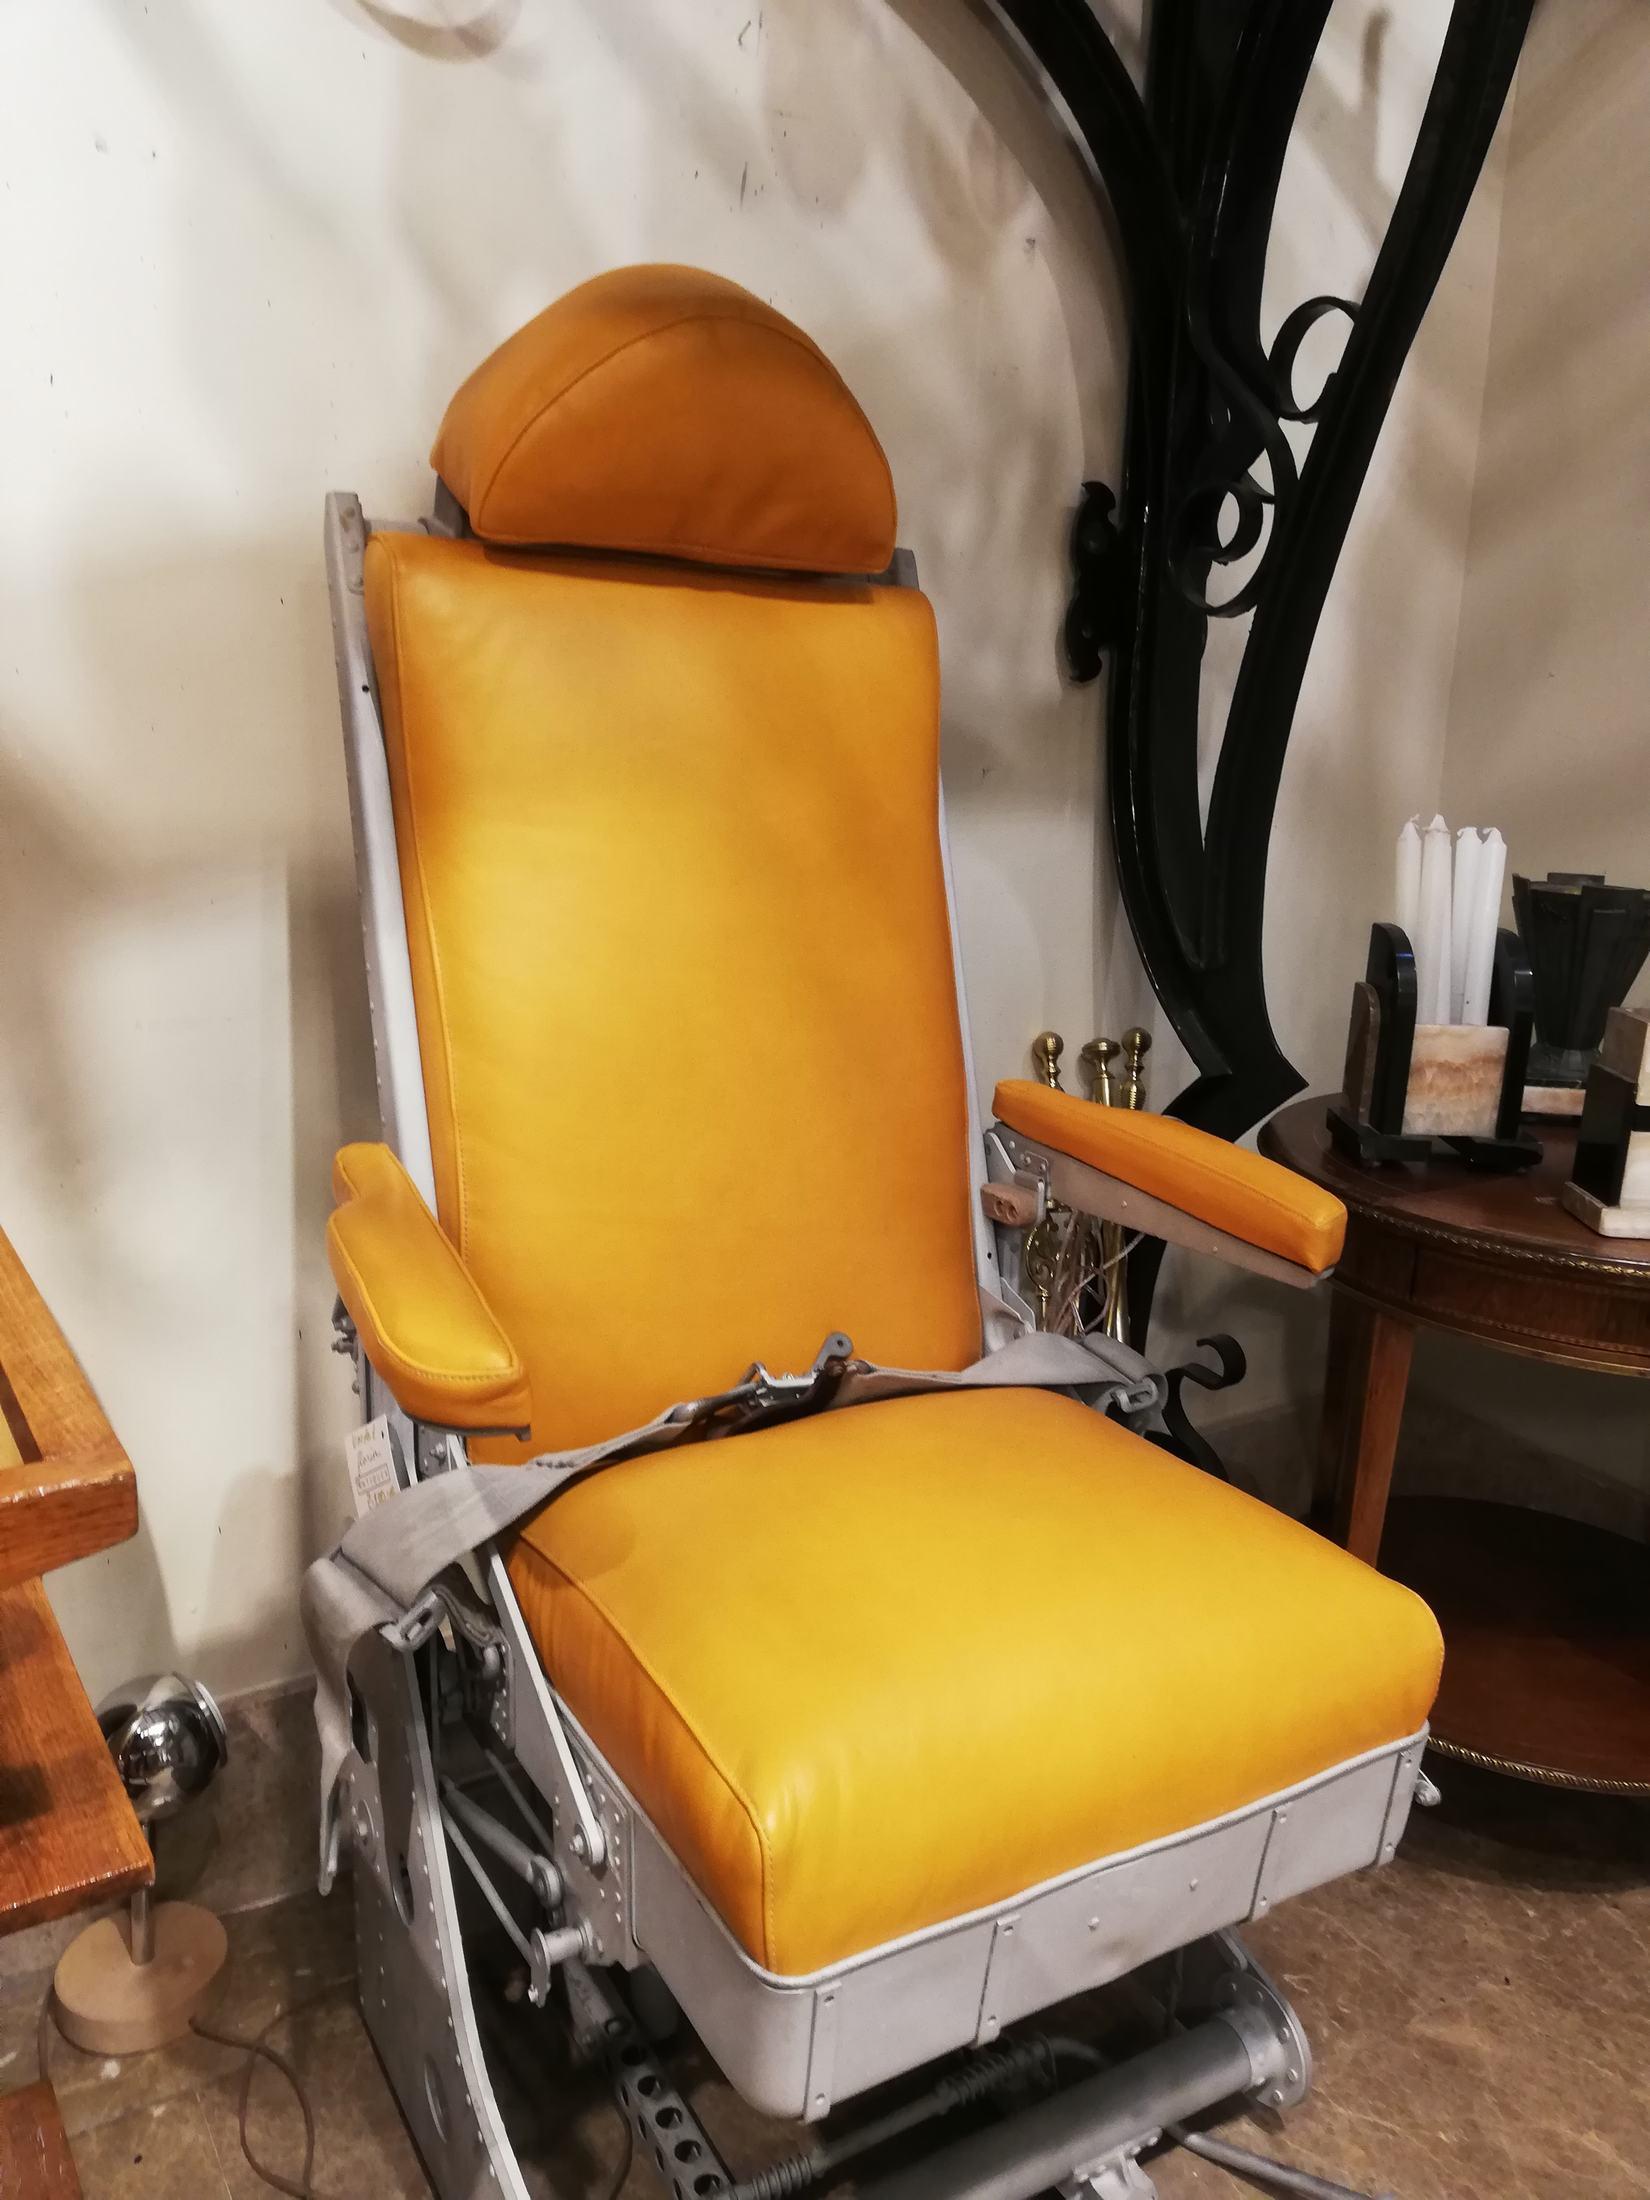 aircraft seats for sale uk